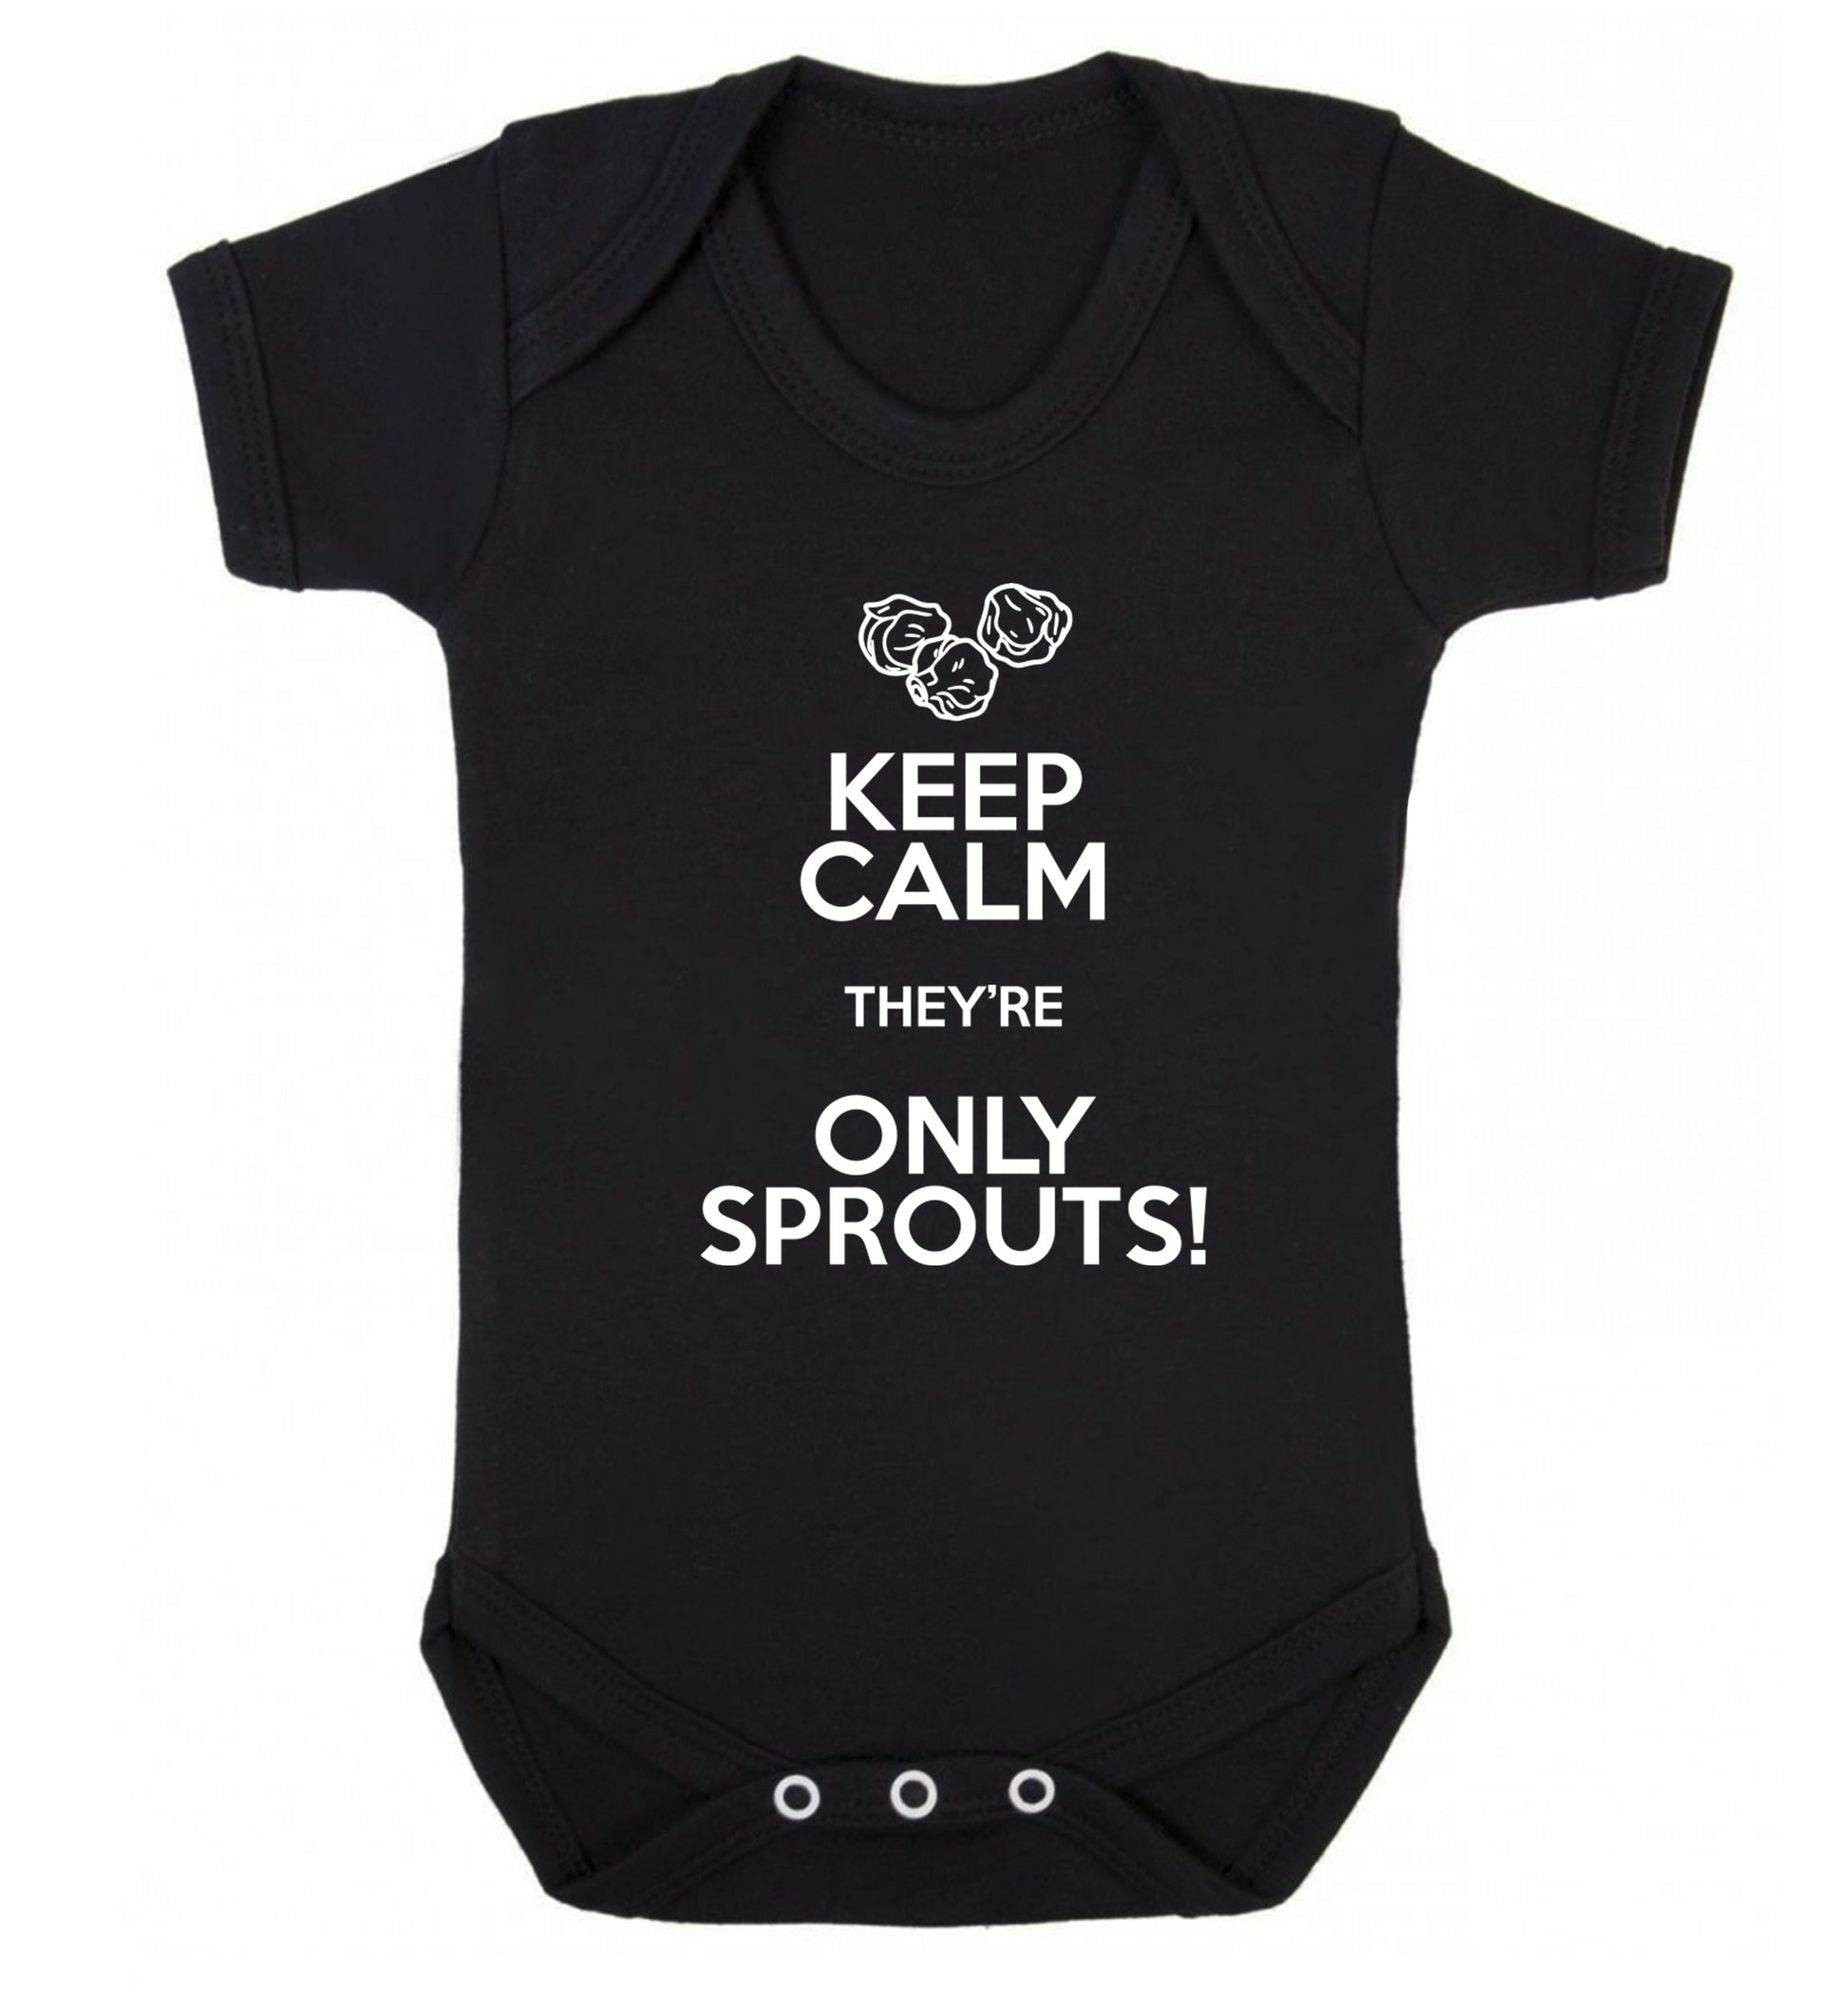 Keep calm they're only sprouts Baby Vest black 18-24 months